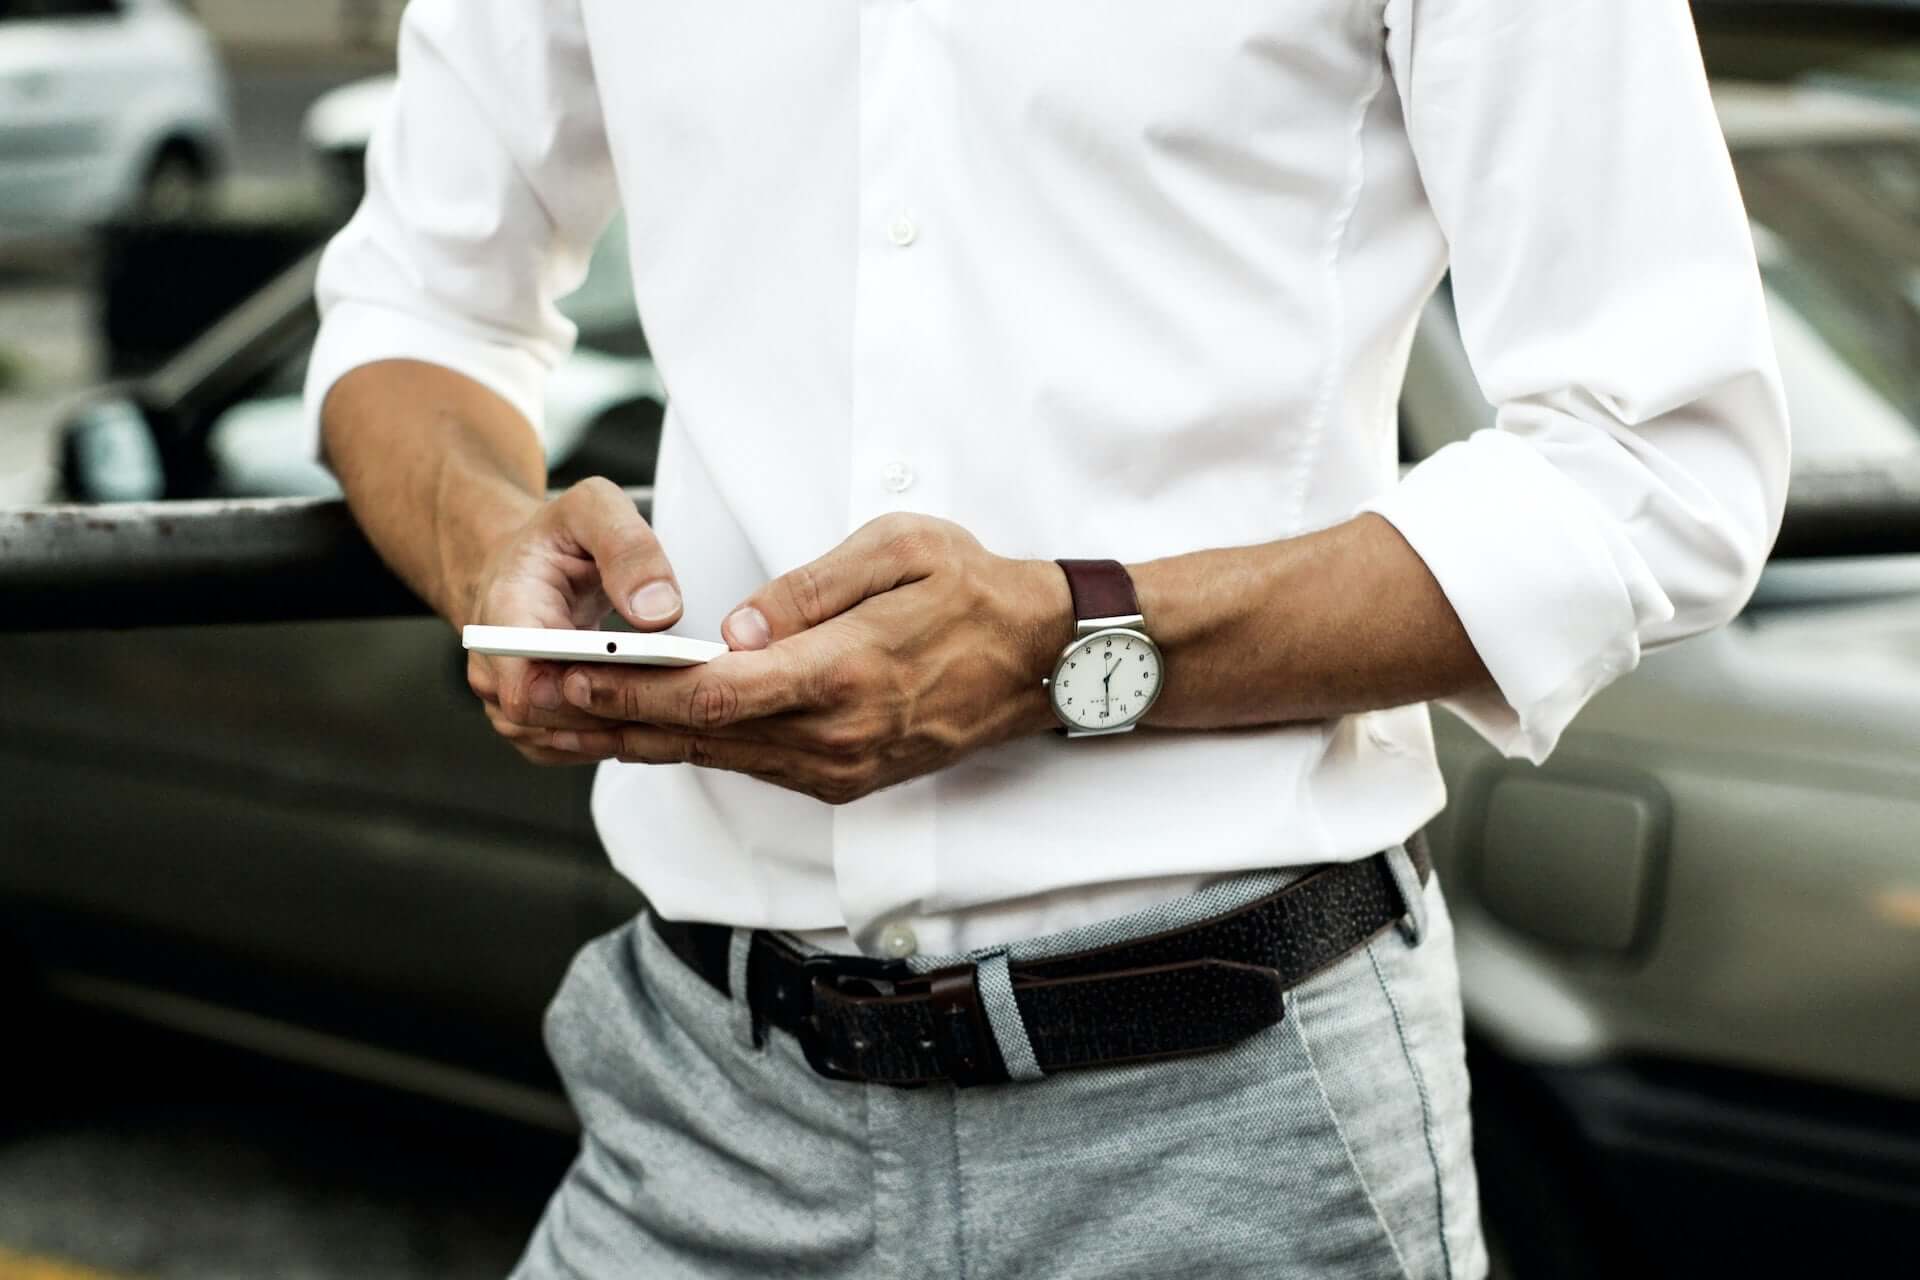 A man in a white shirt and light pants with a black belt types on a phone.